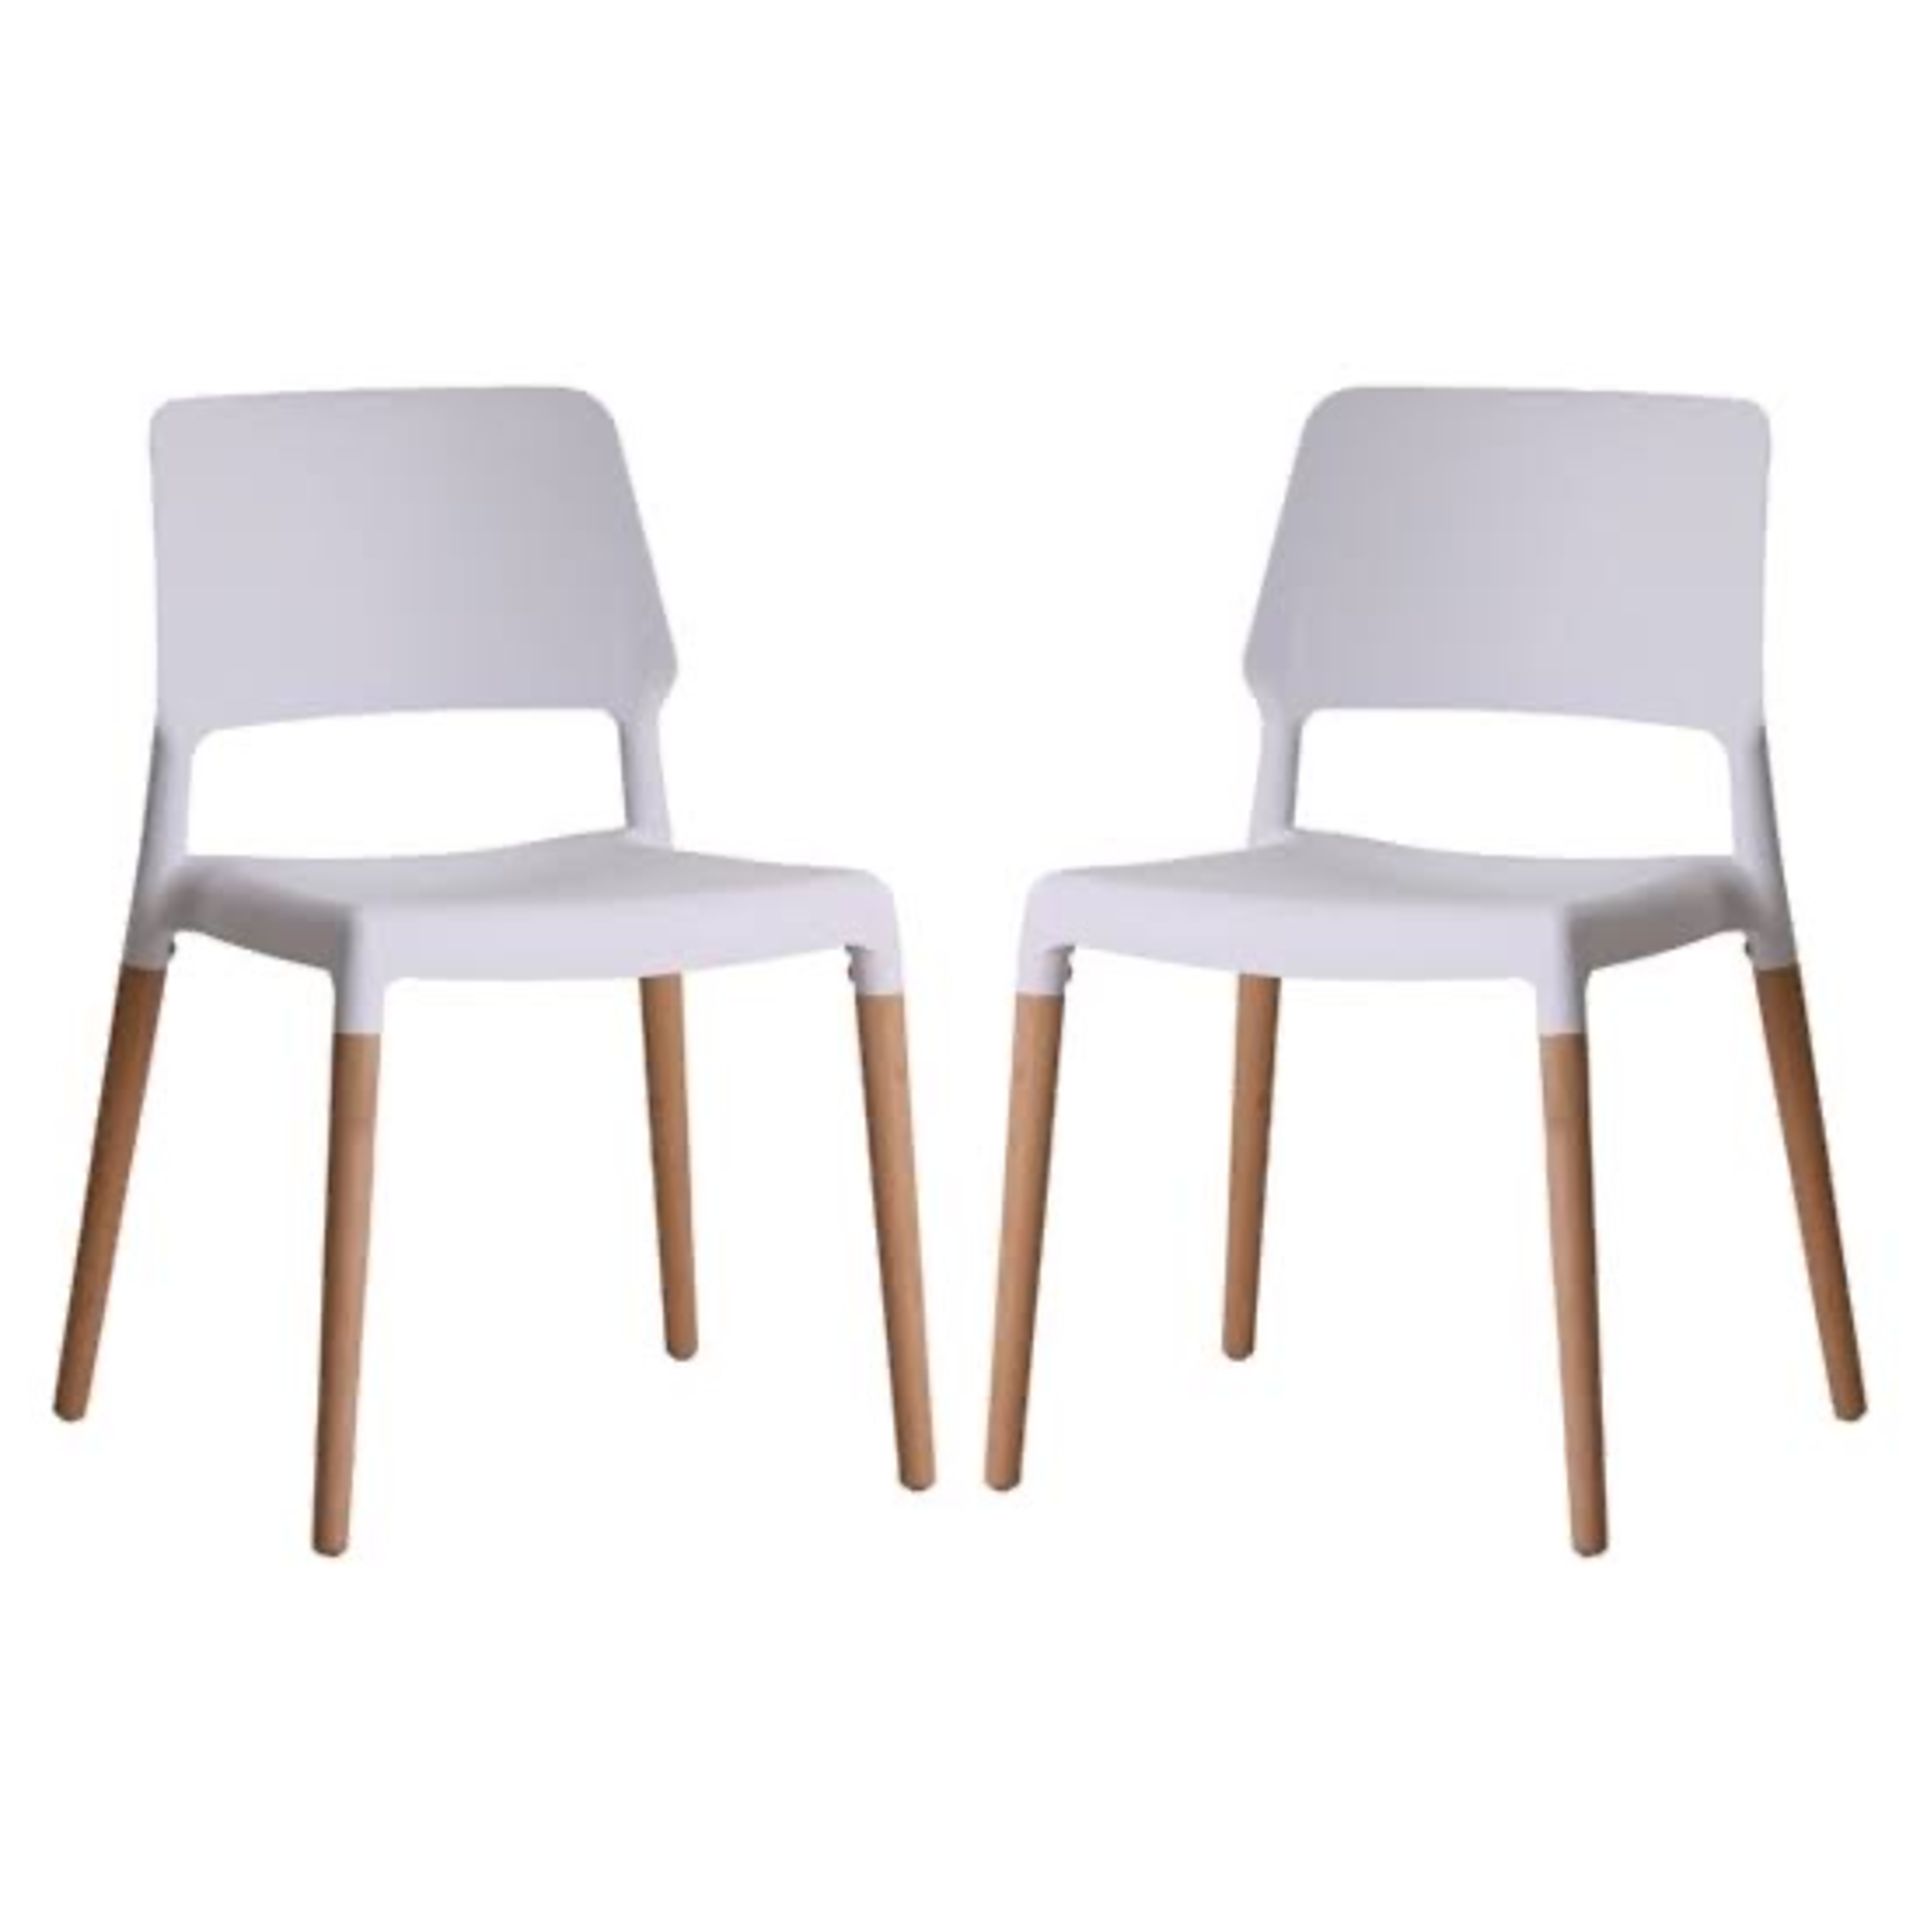 RIVA PAIR OF DINING CHAIRS IN WHITE DURABLE PLASTIC - RRP £159 PER PAIR